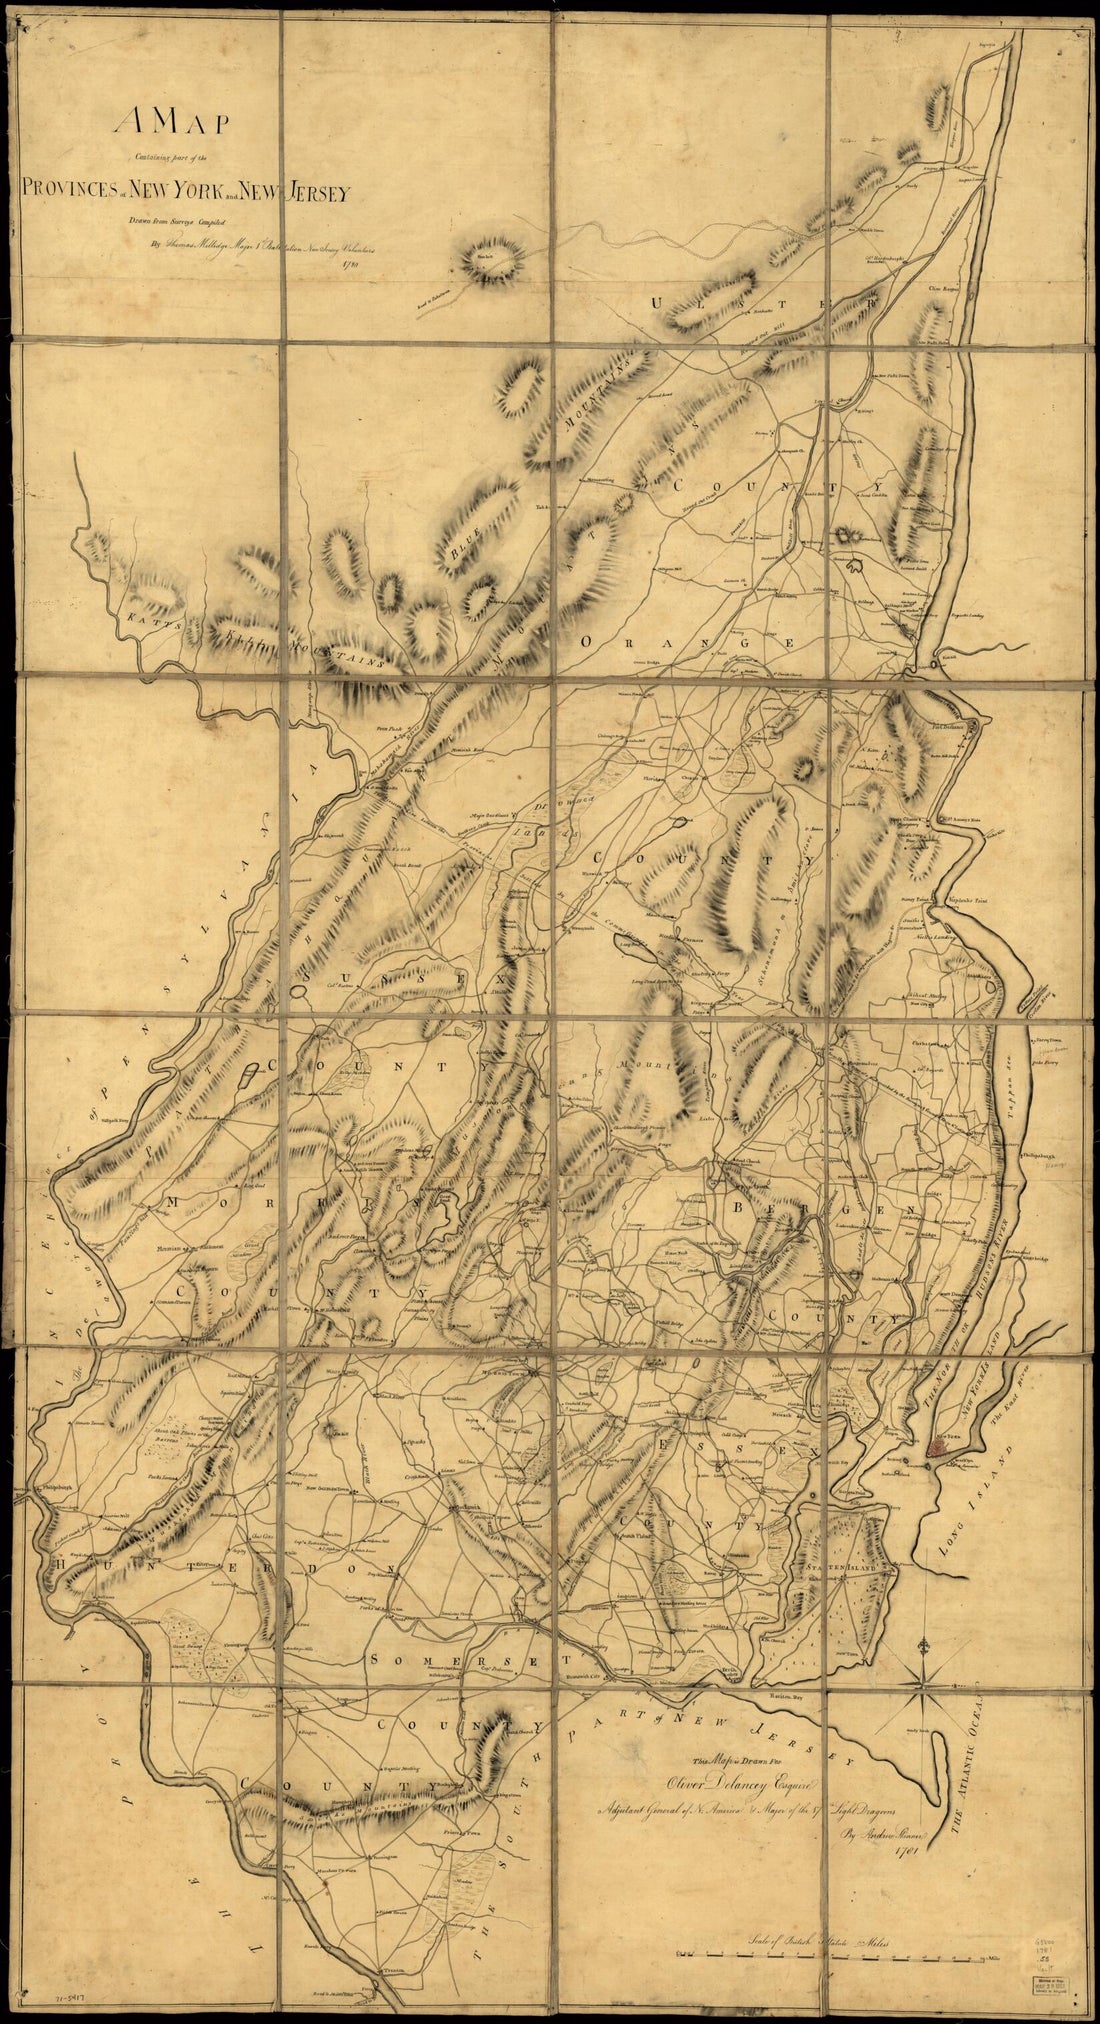 This old map of A Map Containing Part of the Provinces of New York and New Jersey from 1781 was created by Oliver De Lancey, Thomas Millidge, Andrew Skinner in 1781